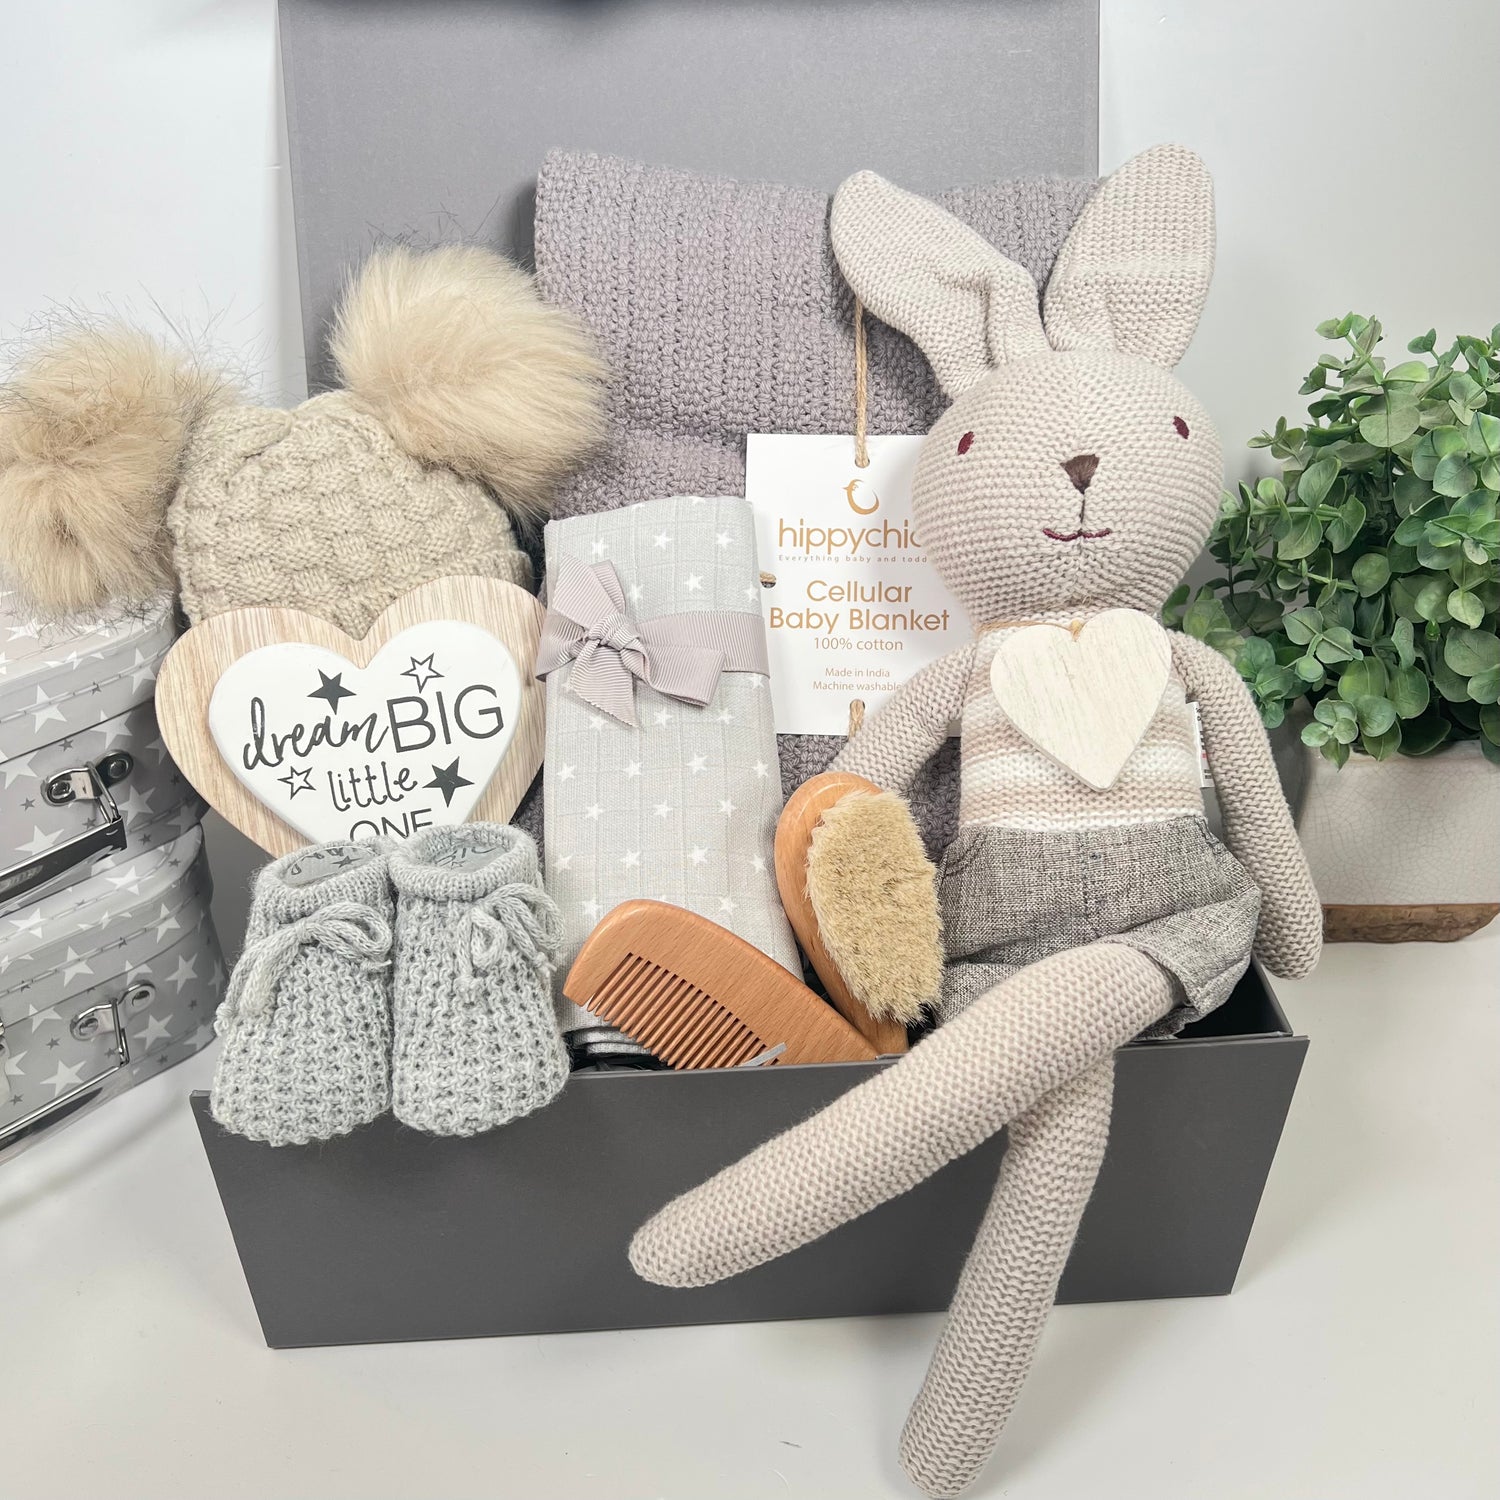 This is a unisex baby gift hamper in a grey magnetic baby keepsake box containg a luxury grey cellular cotton baby blanket, a biscuit coloured baby pom pom hat, a natural wooden baby brush and comb set, a grey muslin square a pair of grey baby bootees, a nursery plaque which reads "Dream big little one" and a grey bunny knitted soft toy.